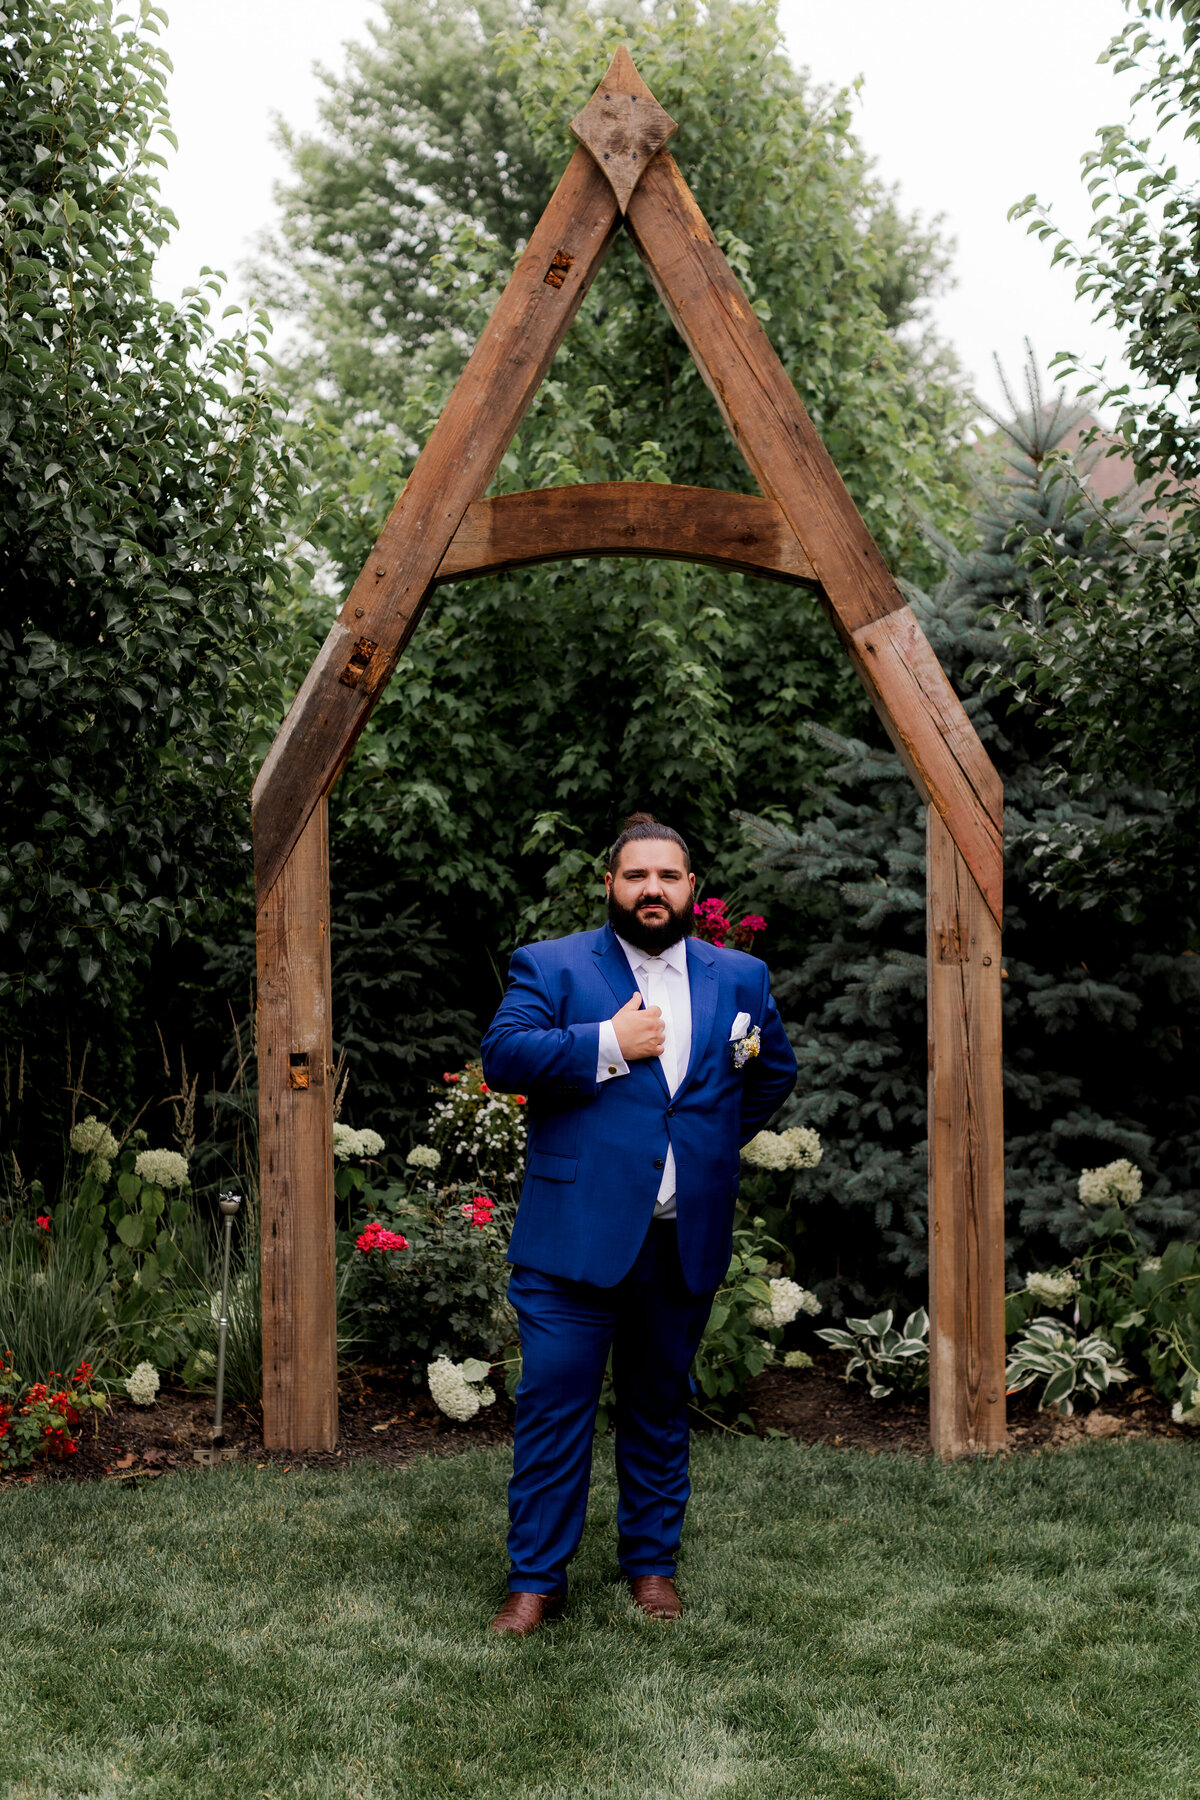 The groom holds his jacket for portrait in the garden.